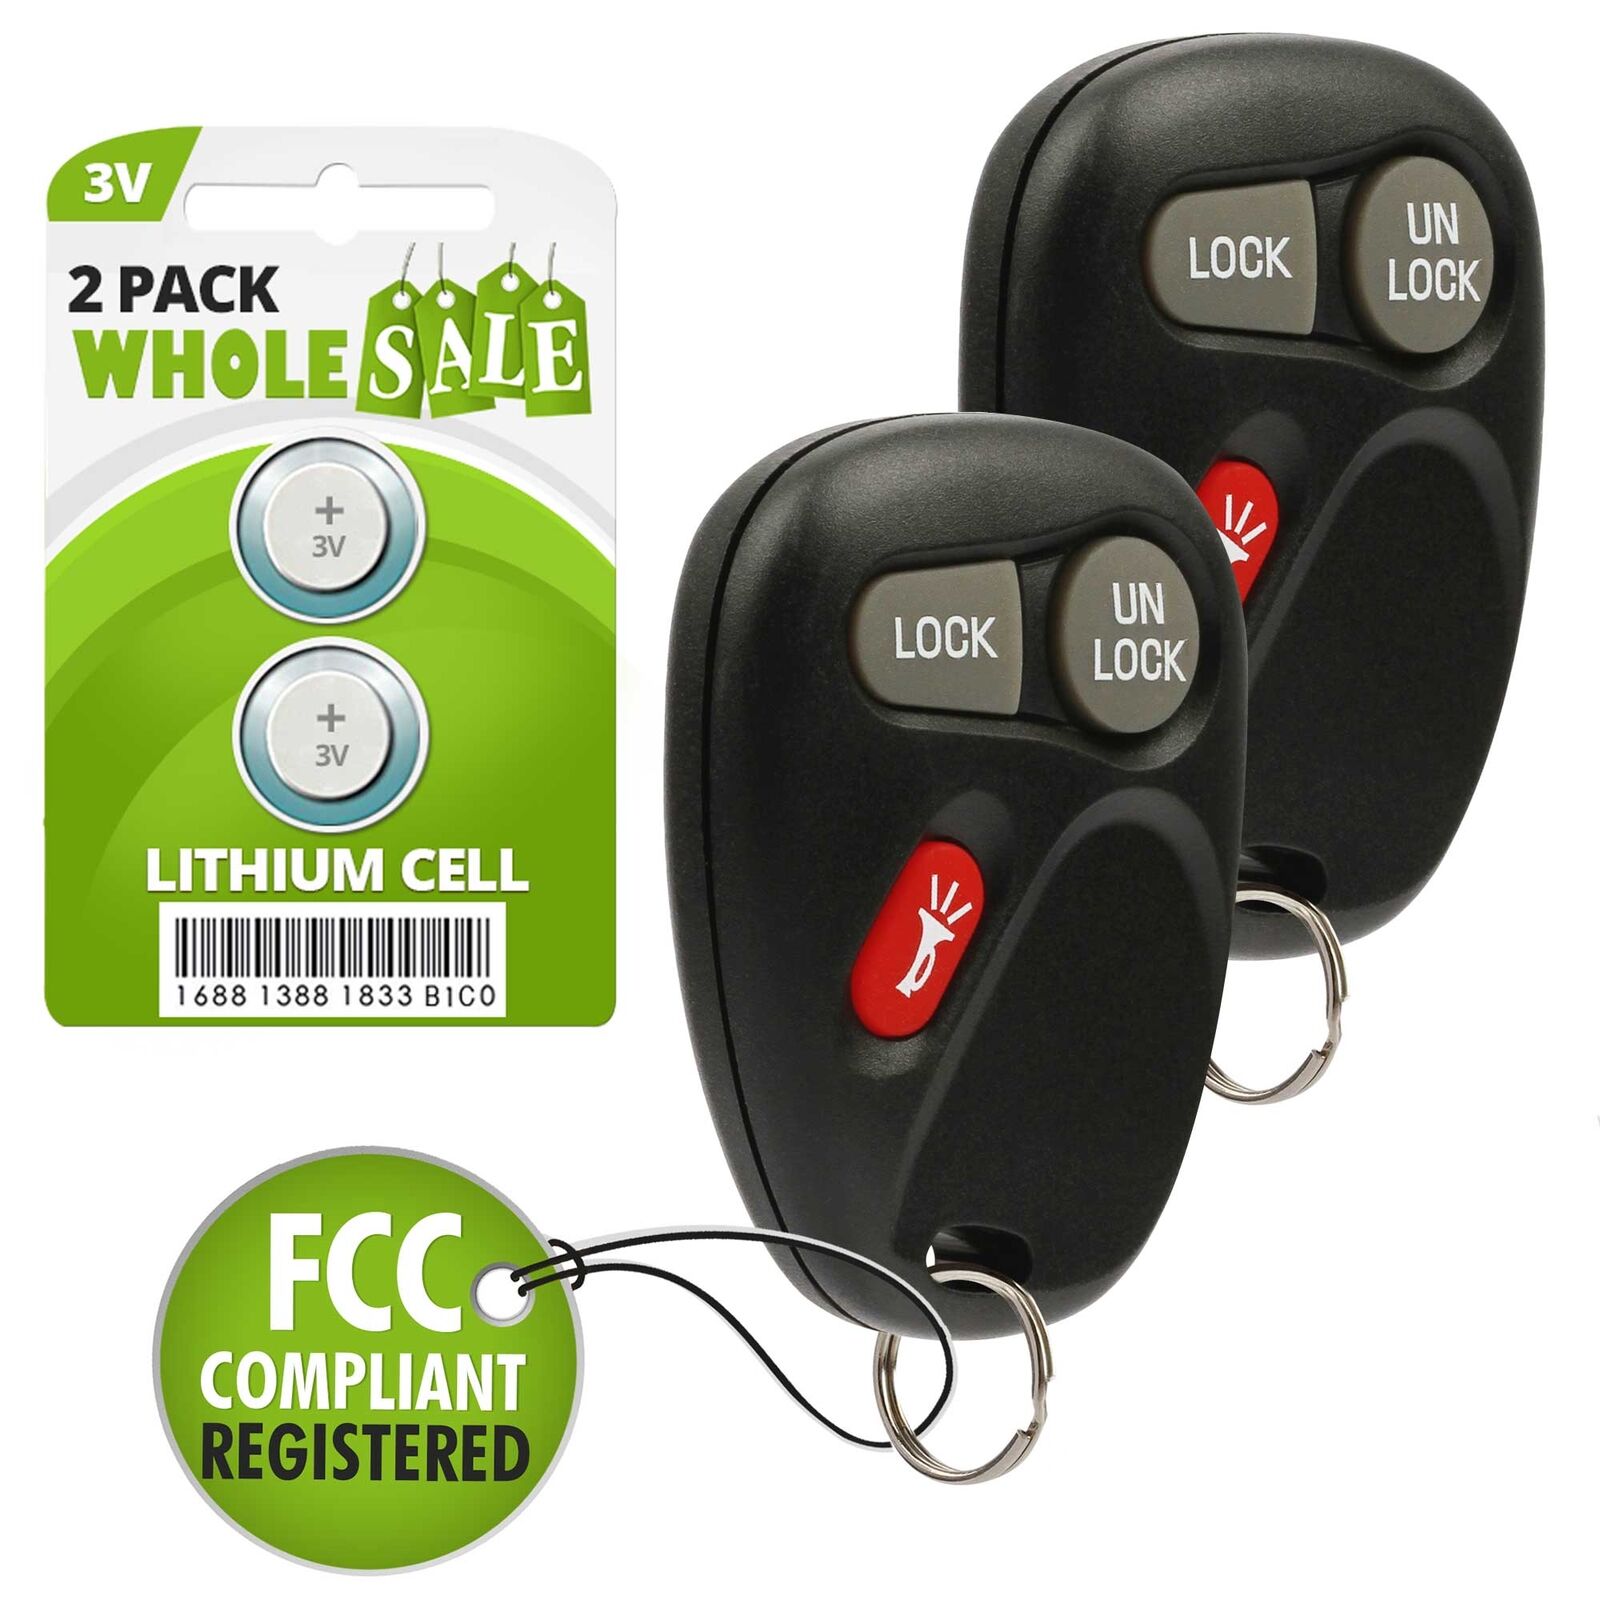 2 Replacement For 2001 2002 Chevrolet Suburban Key Fob Remote